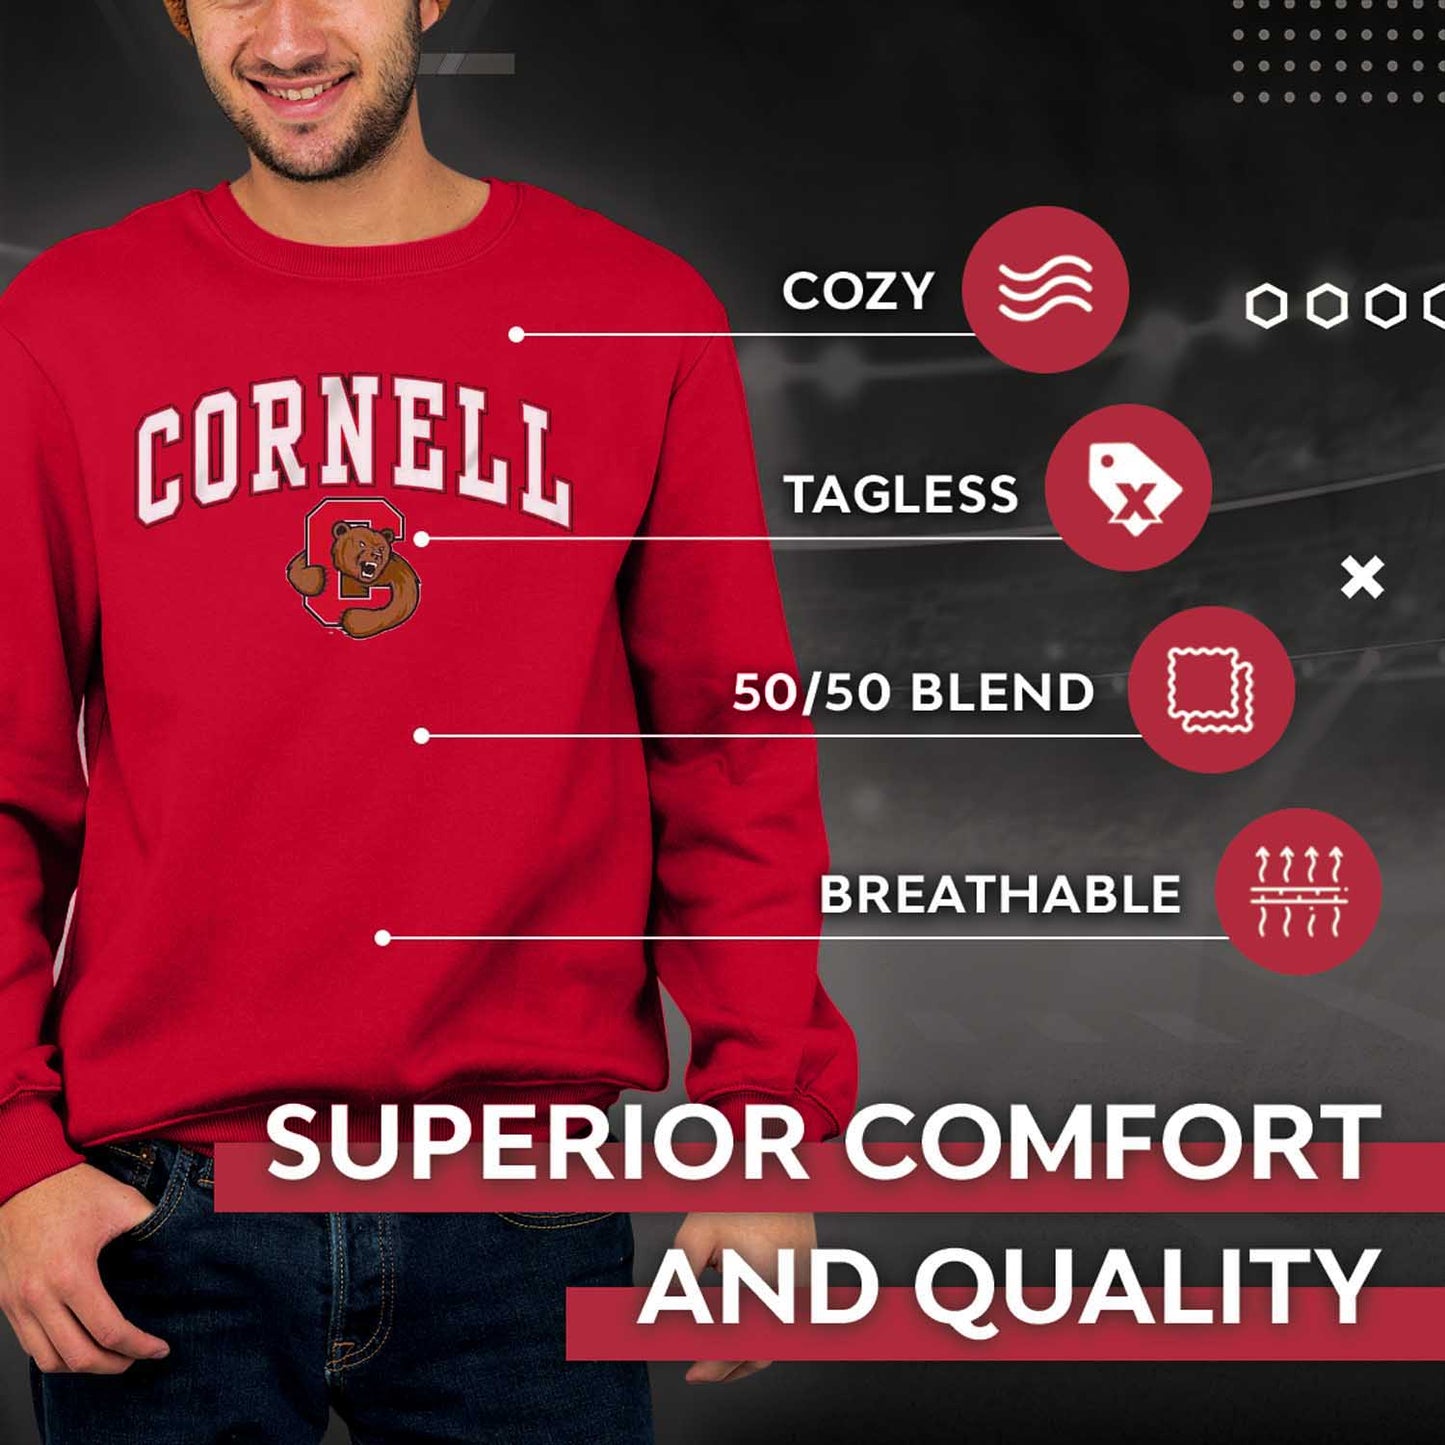 Cornell Big Red Campus Colors Adult Arch & Logo Soft Style Gameday Crewneck Sweatshirt  - Red